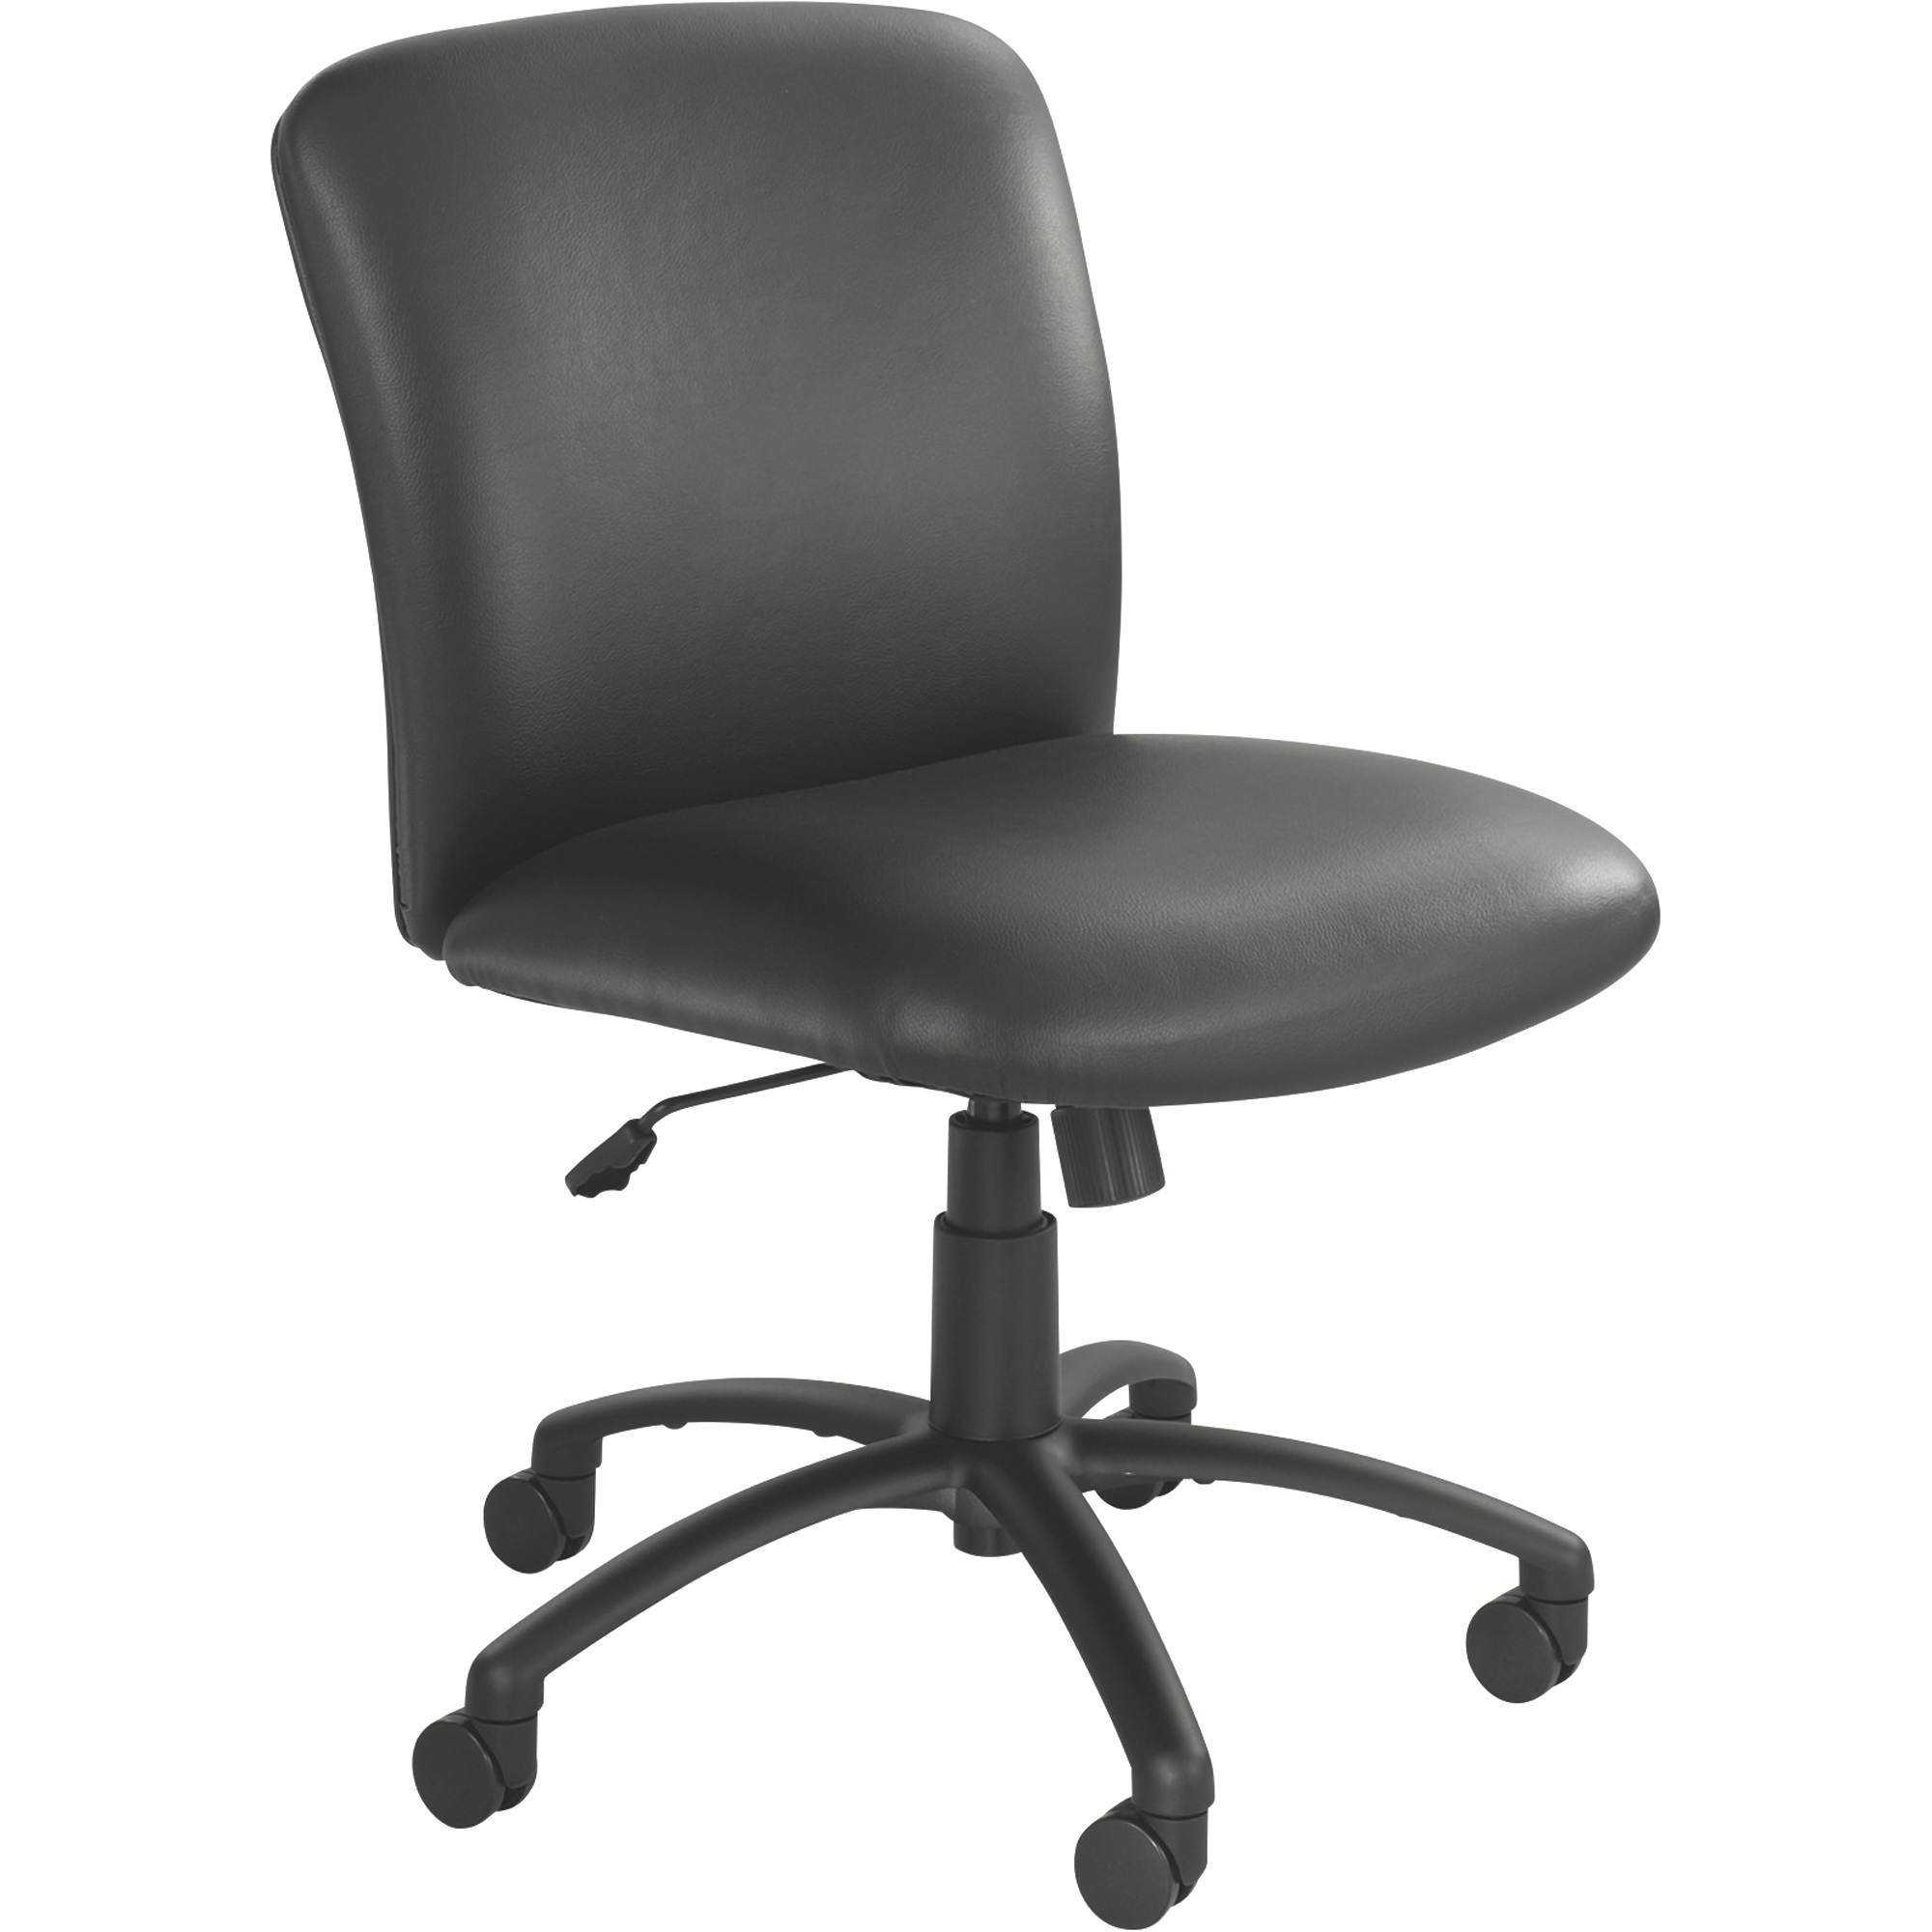 Safco Uber Big and Tall Mid Back Chair — Black Vinyl, Model 3491BV -  SAFCO Products